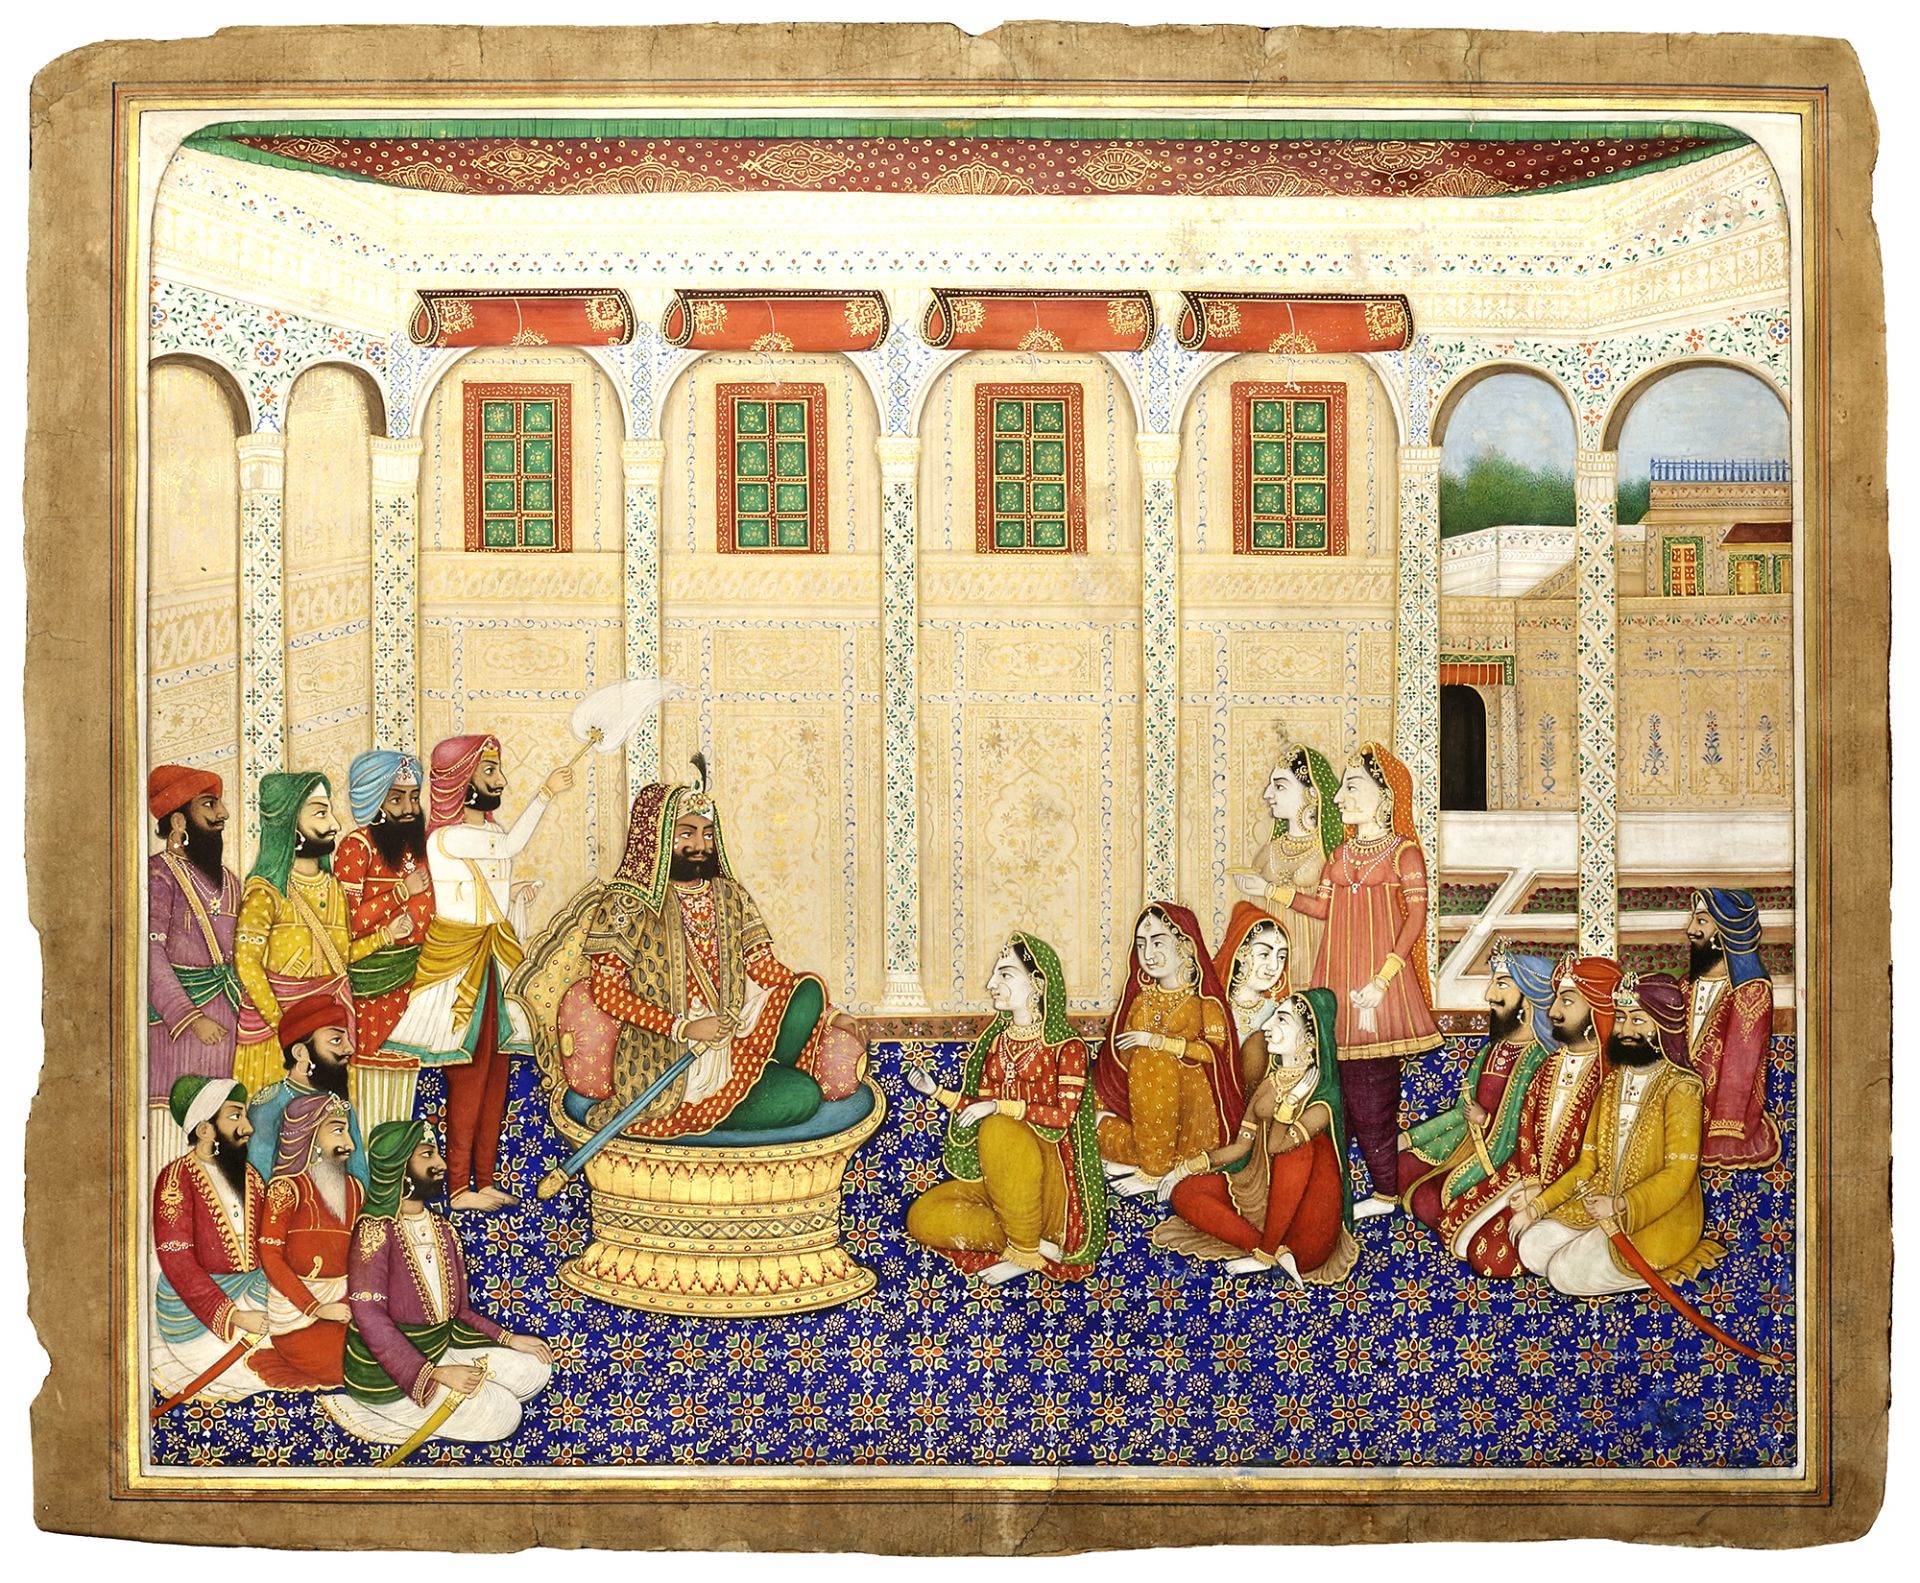 MAHARAJA SHER SINGH IN DURBAR (B. 1807-D.1843), ENTHRONED WITH ATTENDANTS, ATTRIBUTED TO BISHEN SING - Image 2 of 2